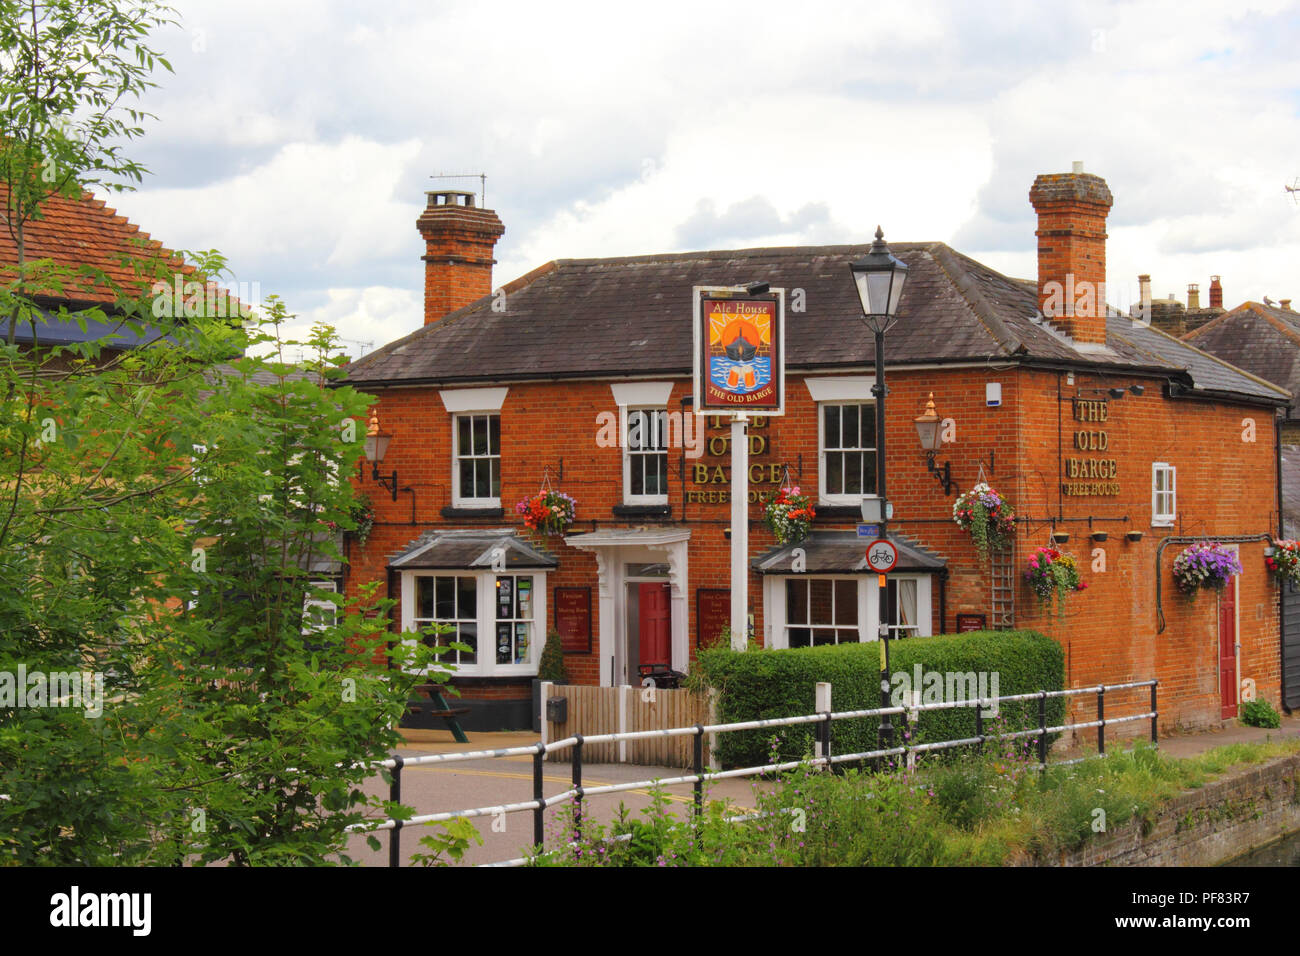 The Old Barge Pub on the River Lea, Hertford, Hertfordshire, United Kingdom (location featured in the Inspector Morse episode 'The Infernal Serpent') Stock Photo